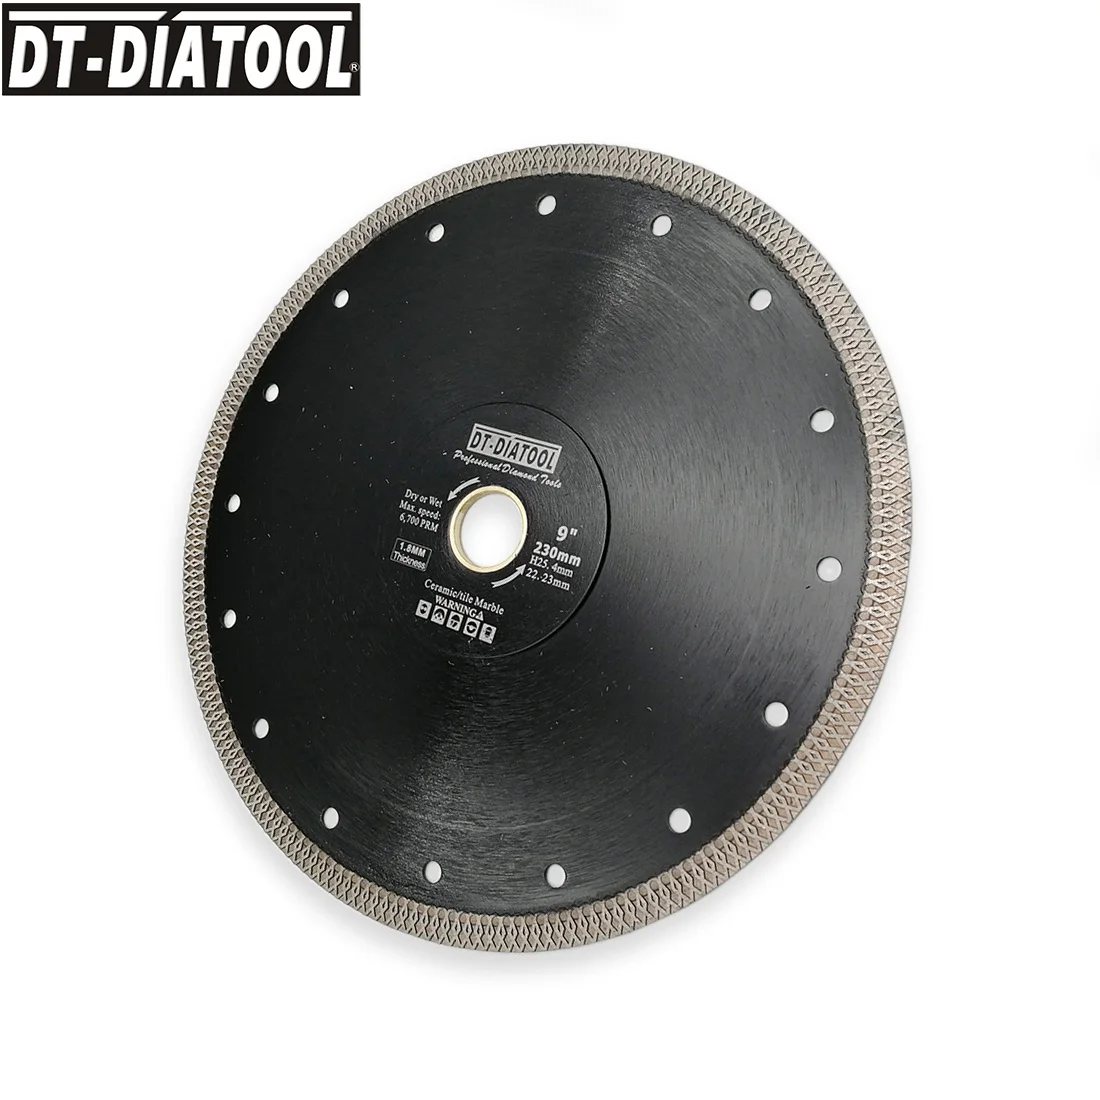 DT-DIATOOL 1piece Hot-pressed Dry or Wet Diamond Reinforced core ring Cutting Disc X Mesh turbo Saw Blades Dia 9inch/230mm Wheel